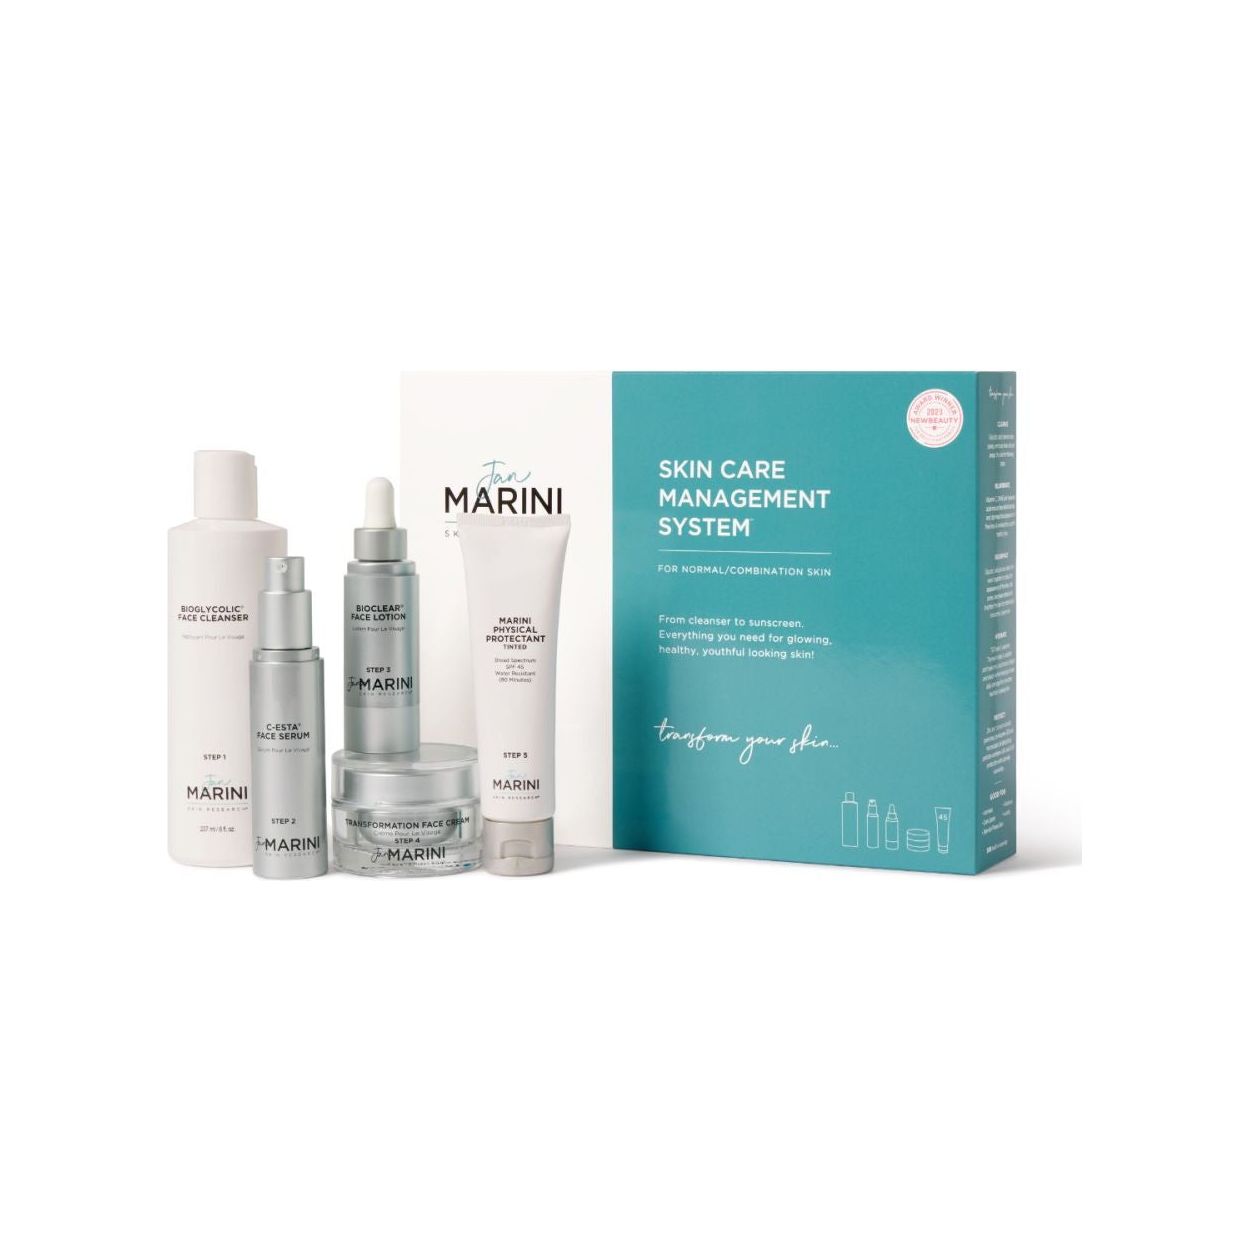 Jan Marini Skin Care Management System™ Normal/Combo with Physical SPF